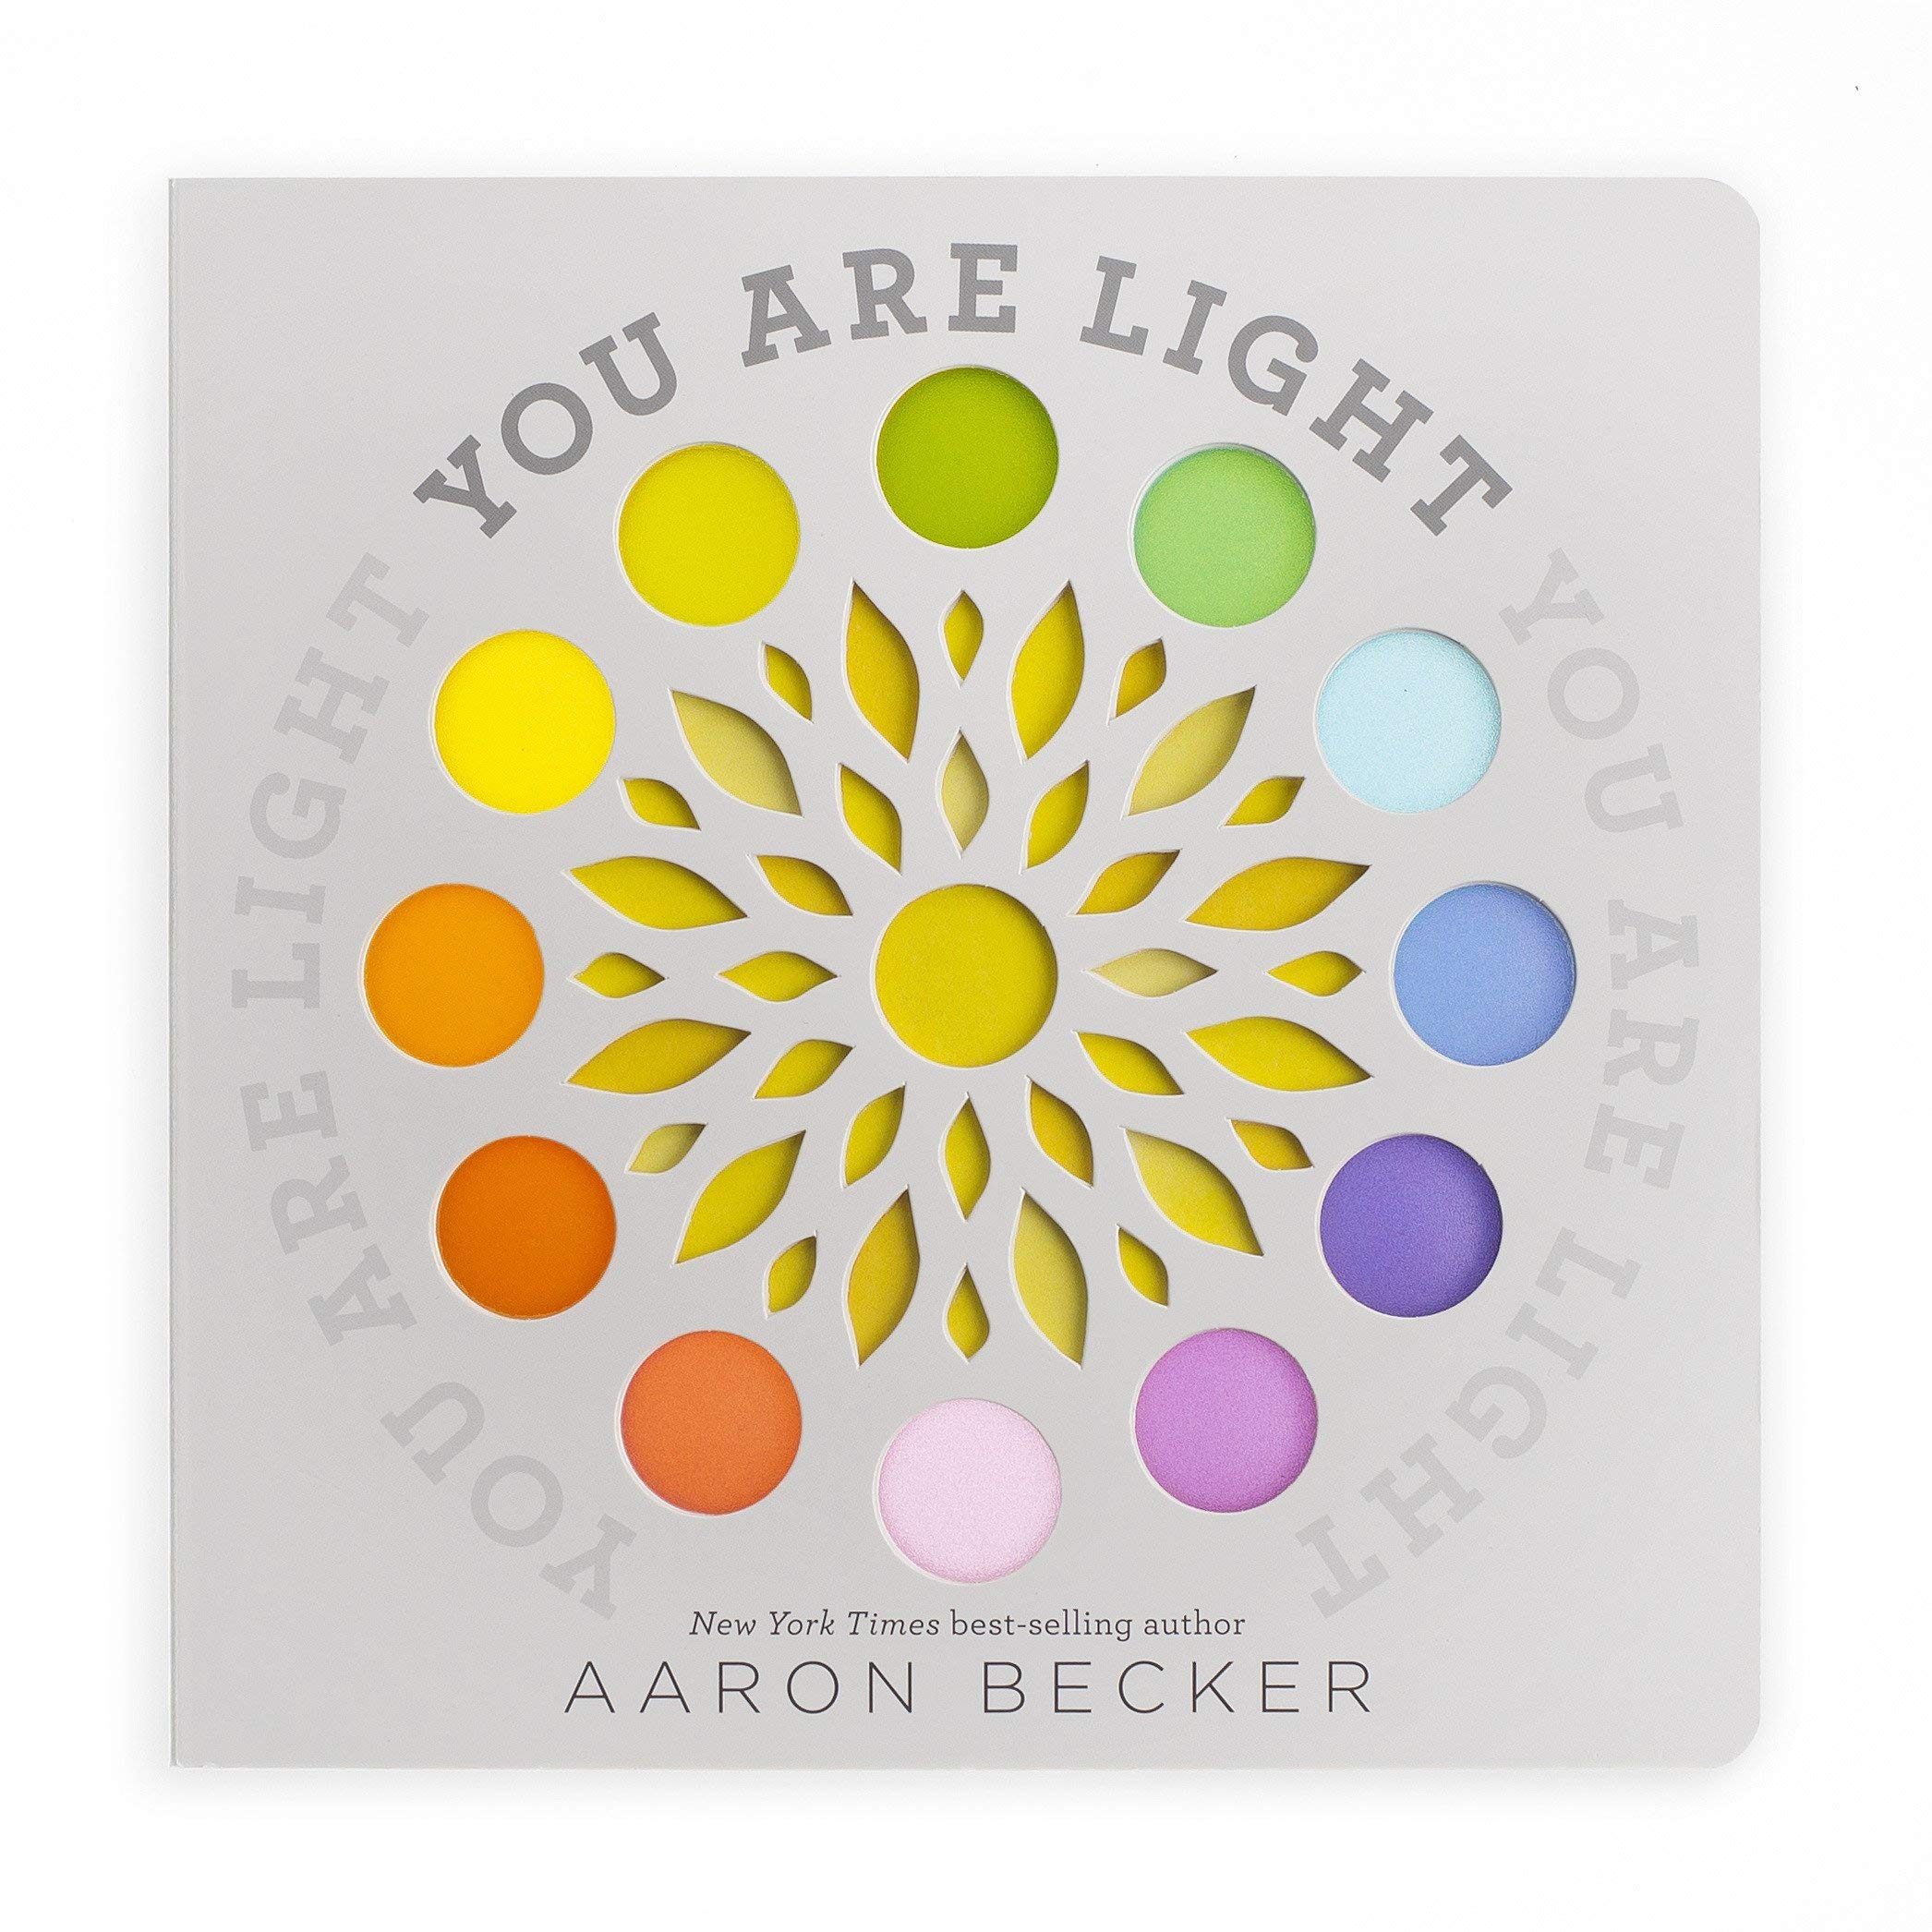 You are light